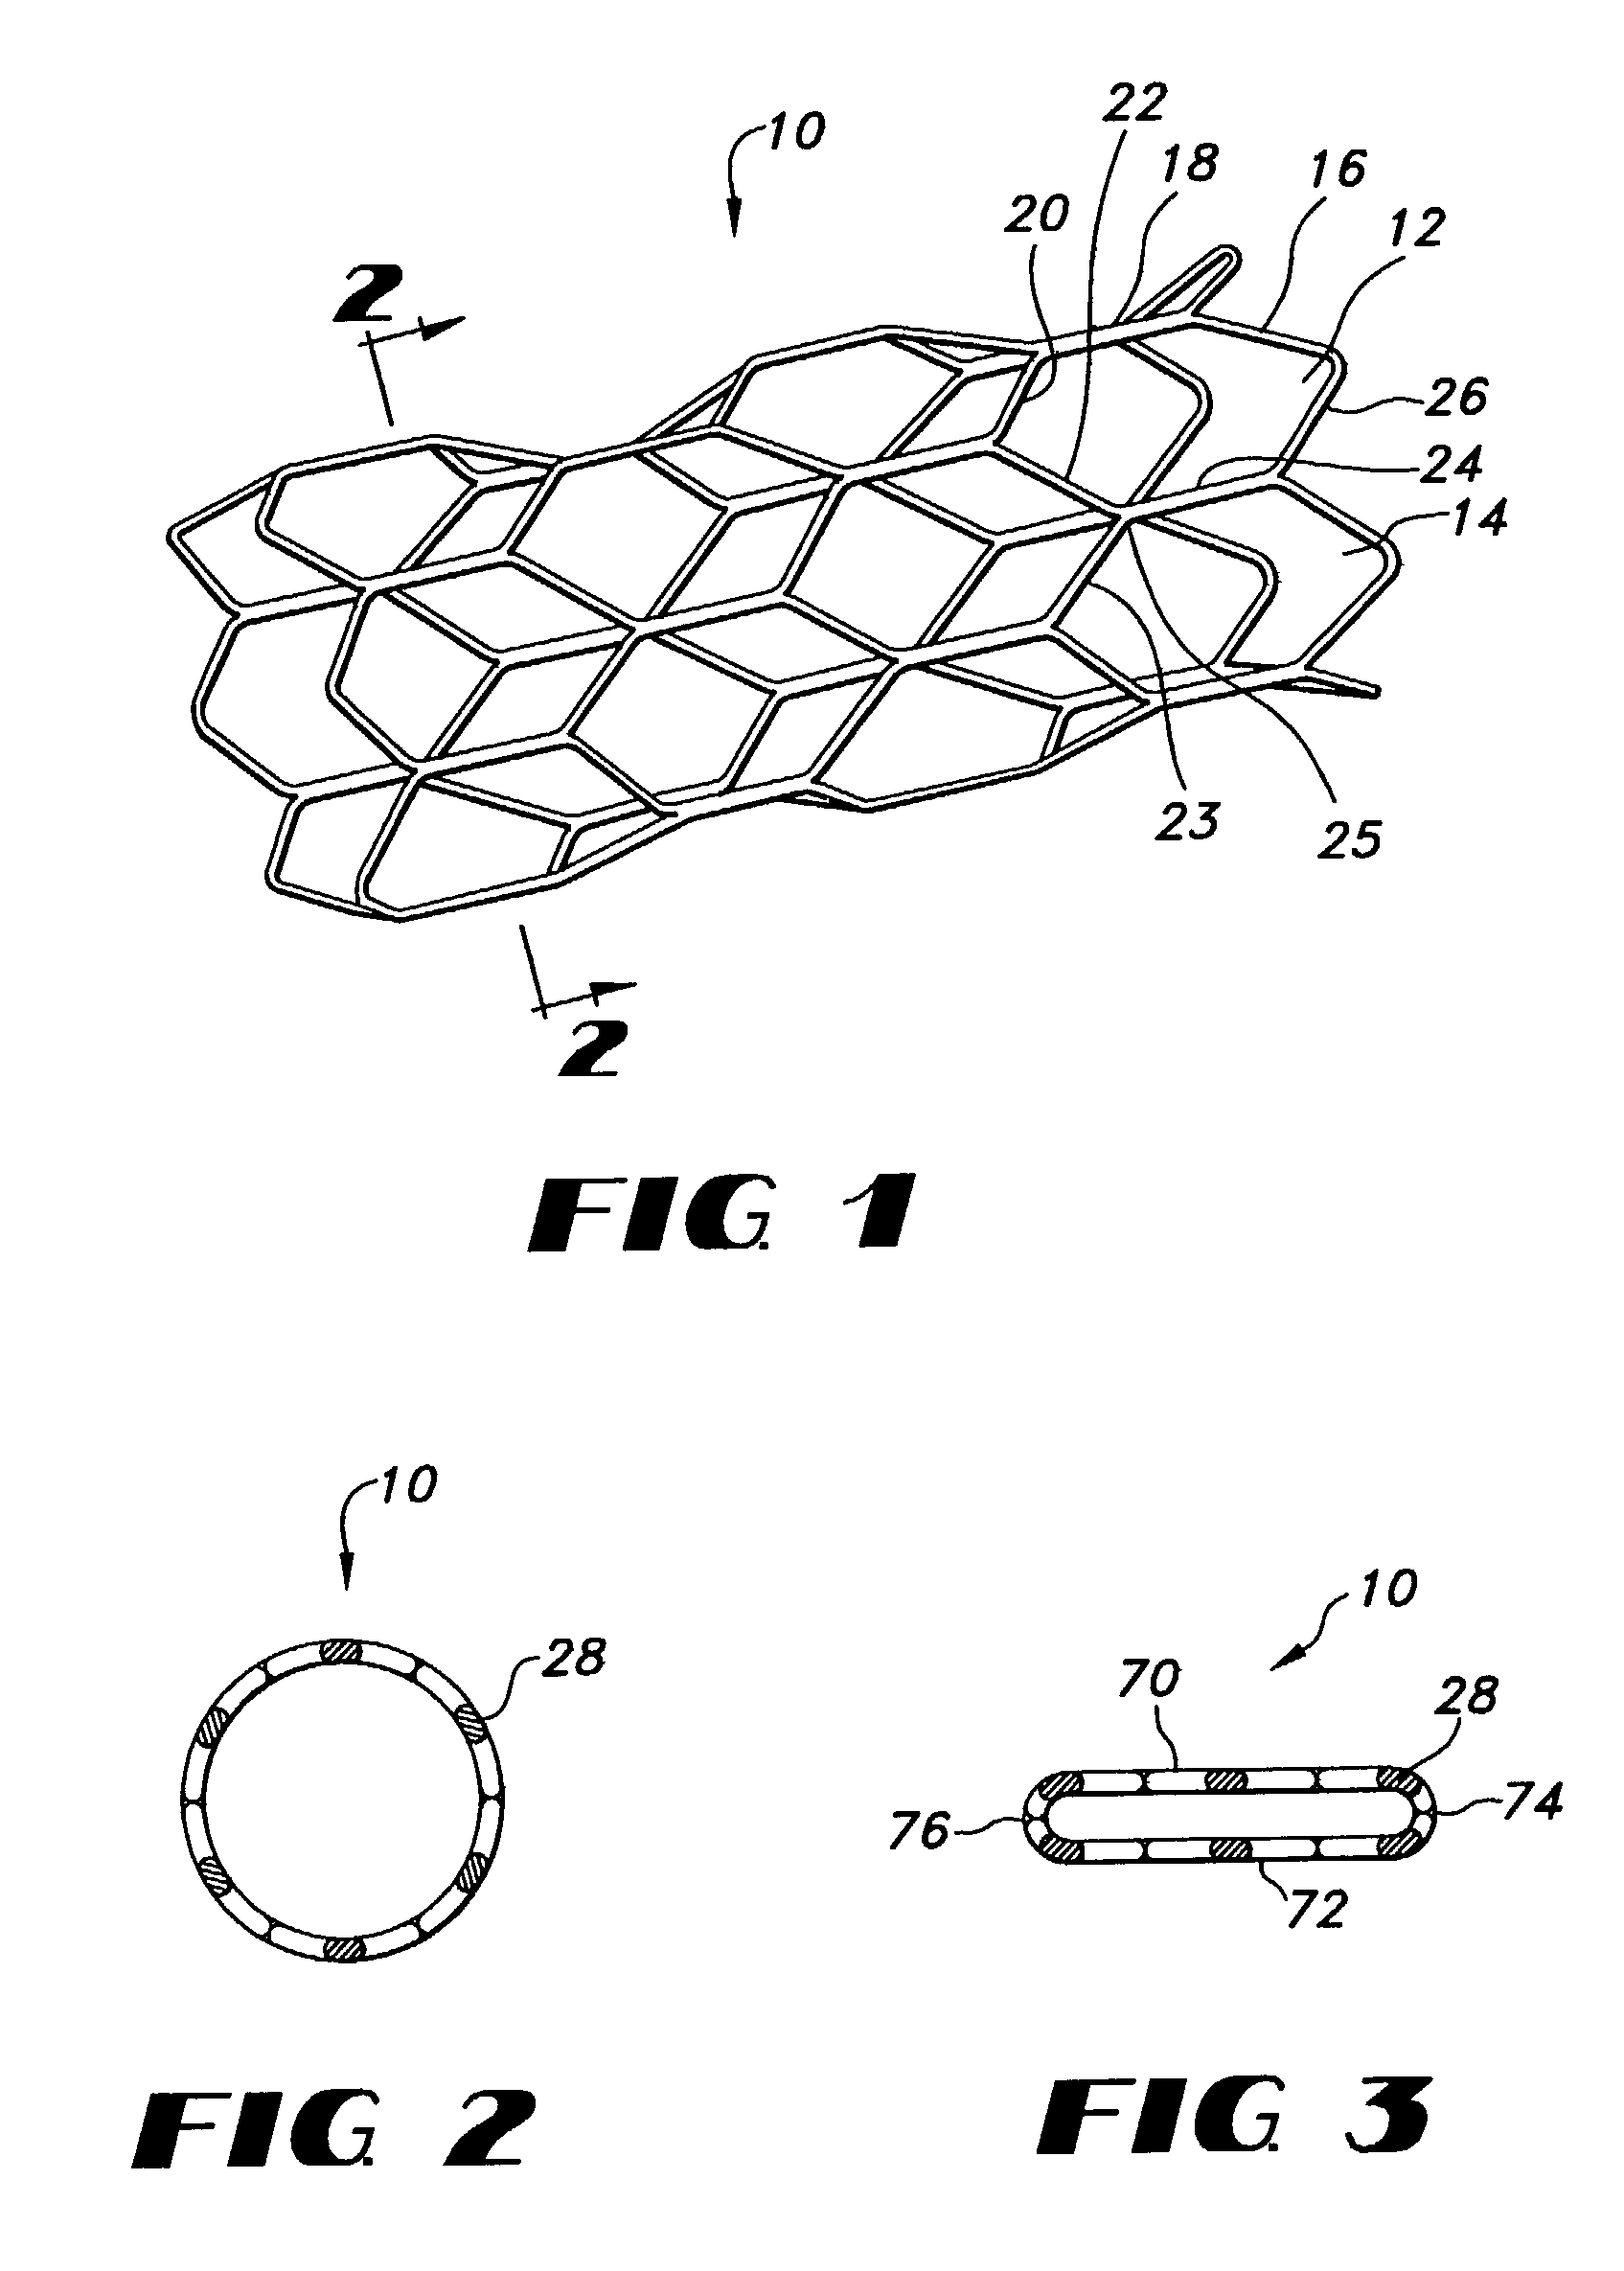 Flat knitted stent and method of making the same